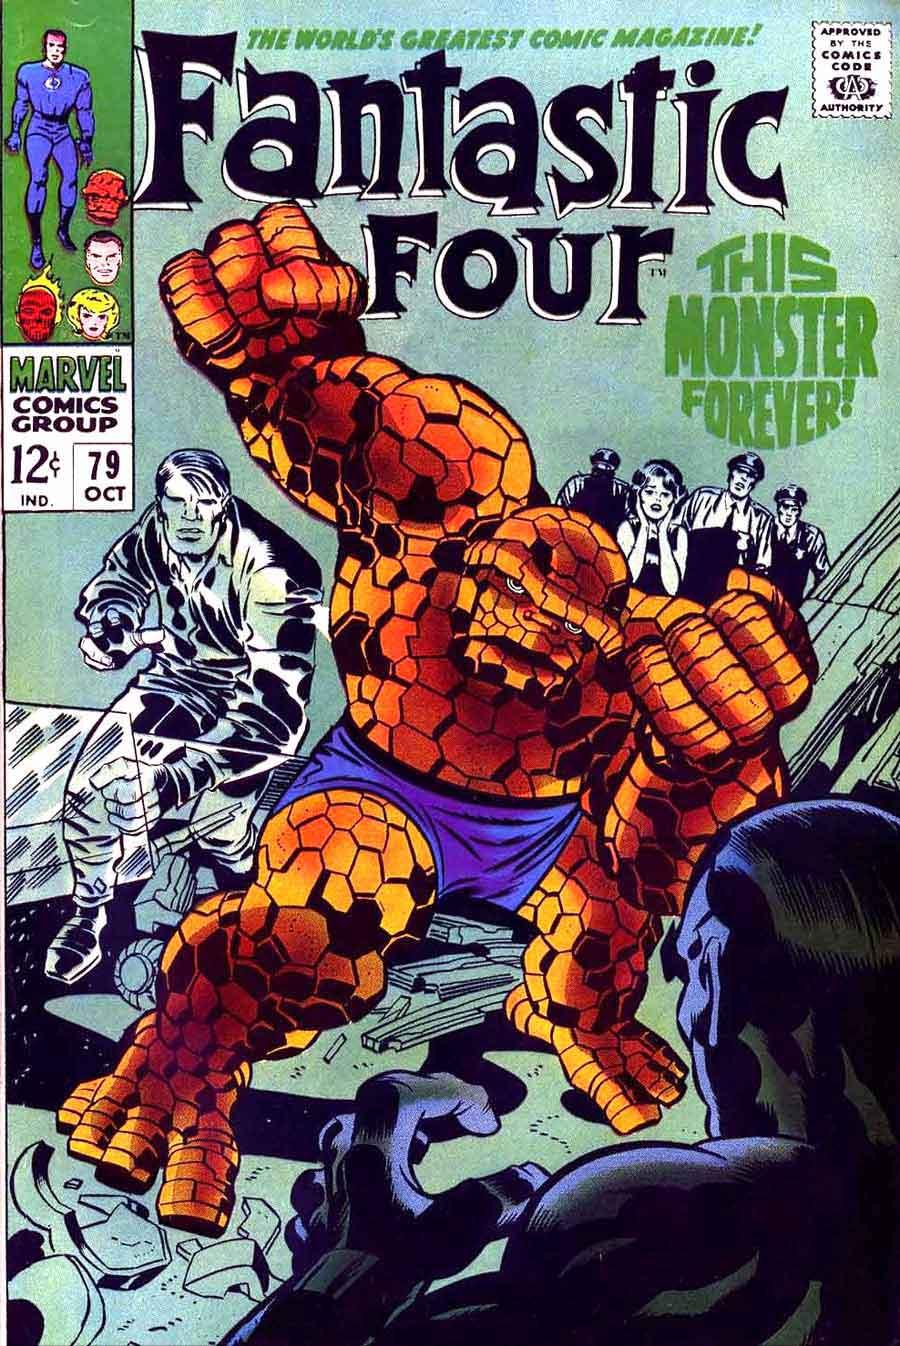 Fantastc Four v1 #79 marvel 1960s silver age comic book cover art by Jack Kirby